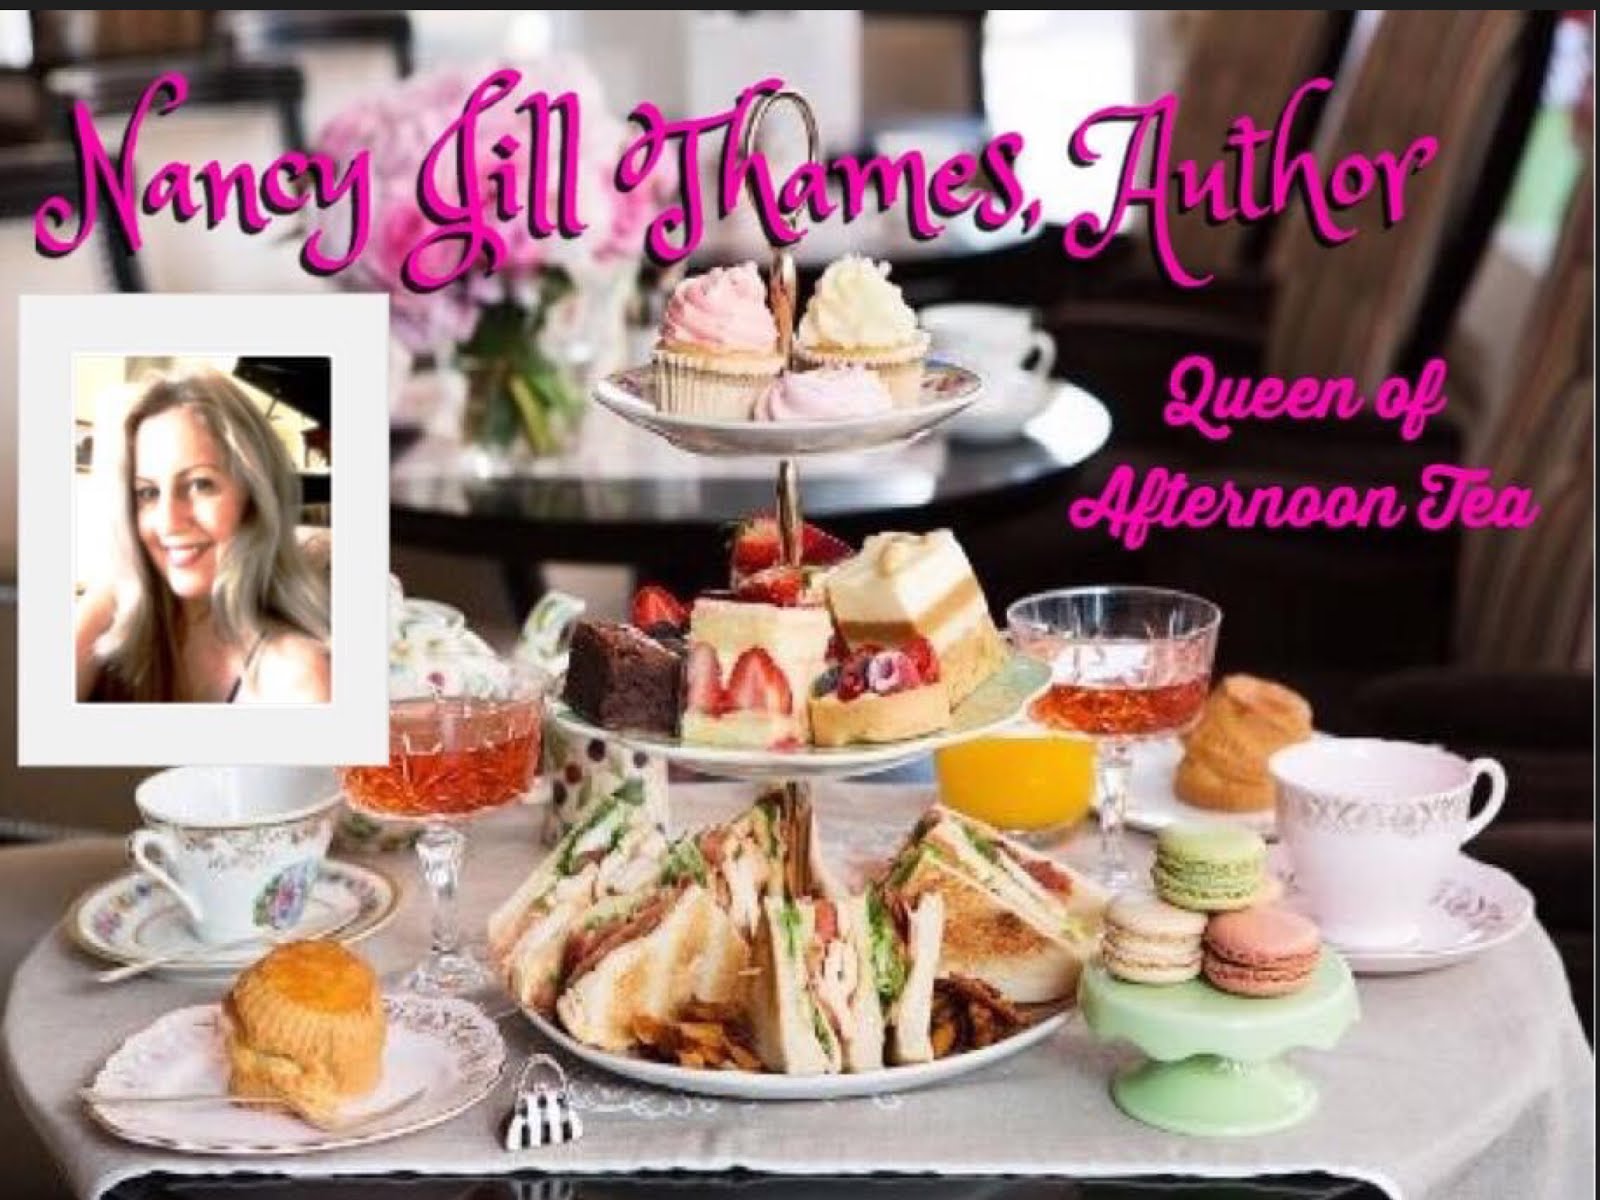 Nancy Jill Thames, Author ~ Queen of Afternoon Tea